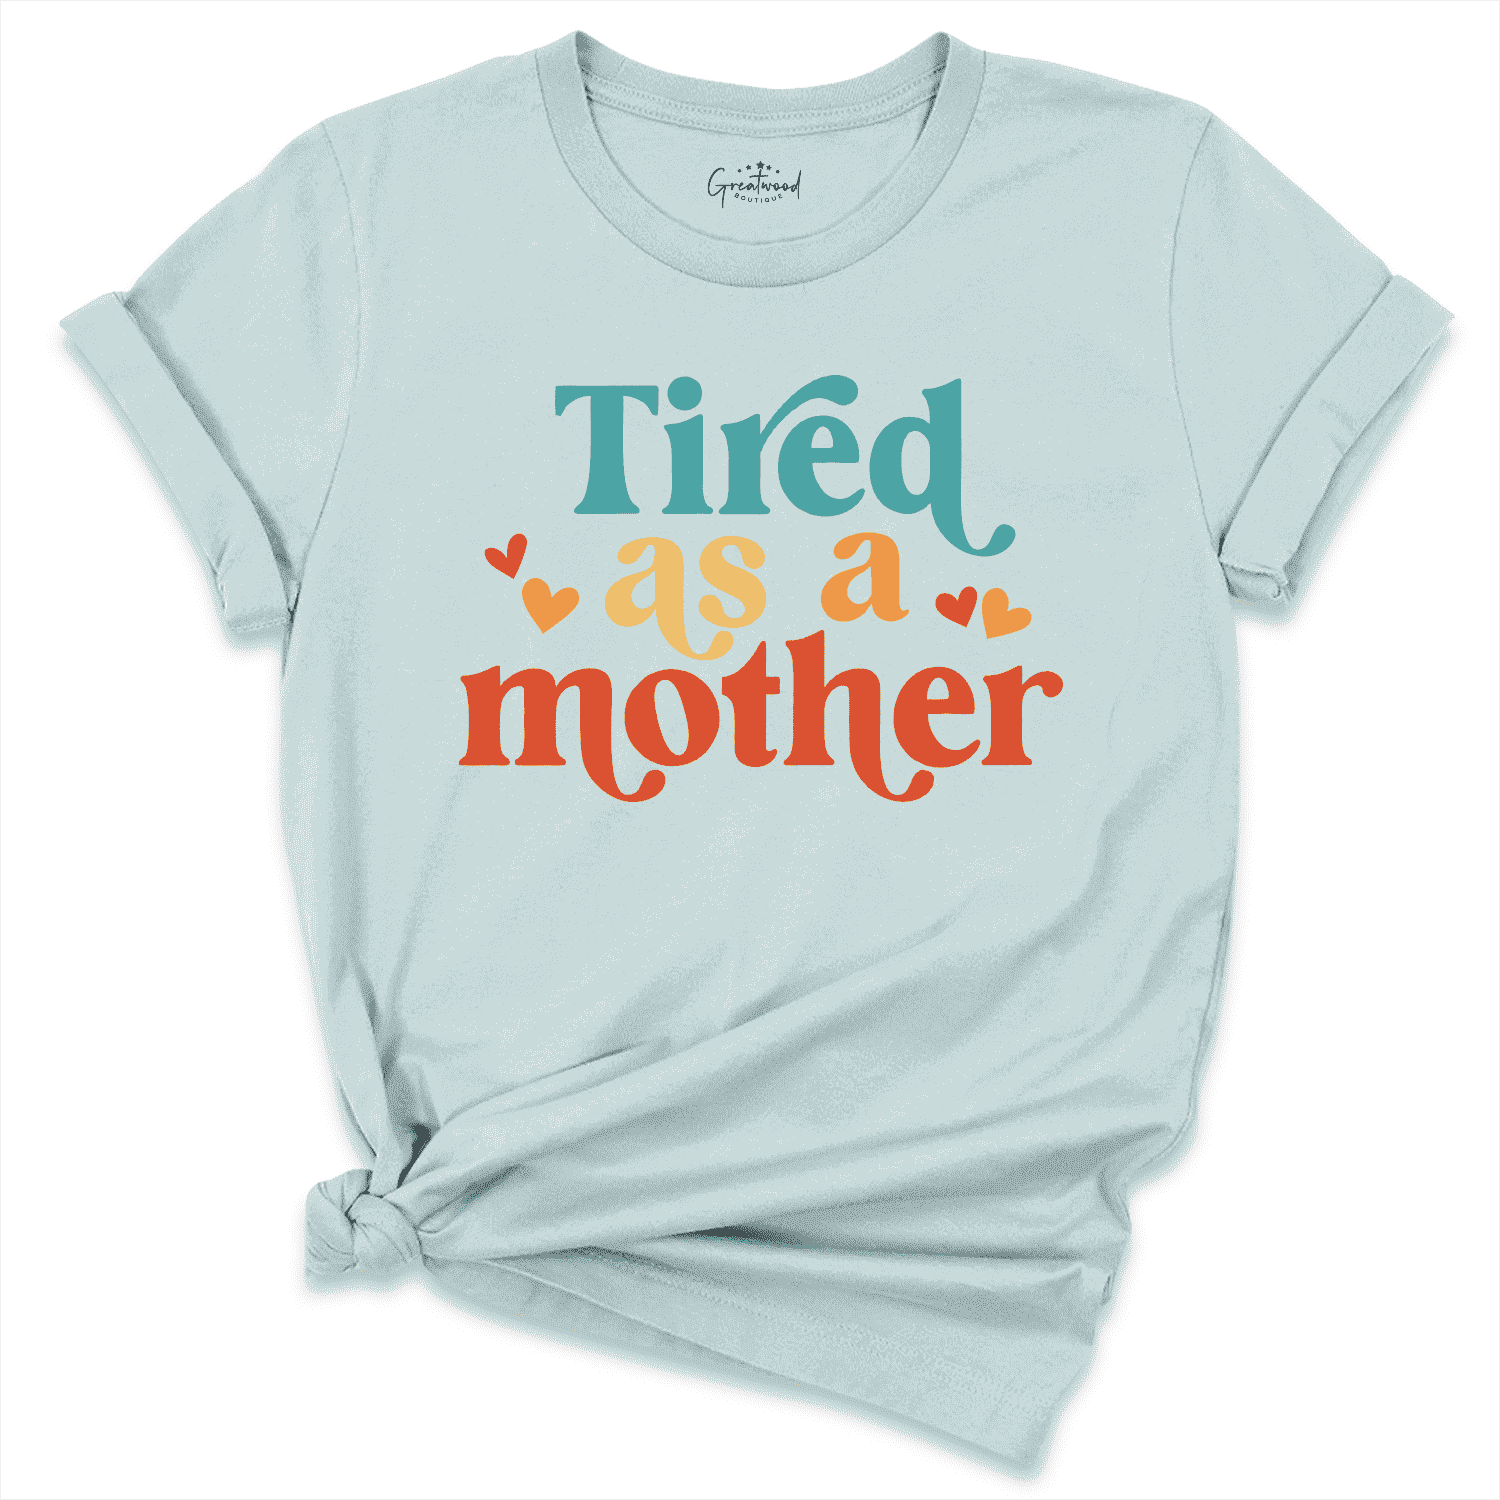 Tired Mother Shirt Blue - Greatwood Boutique